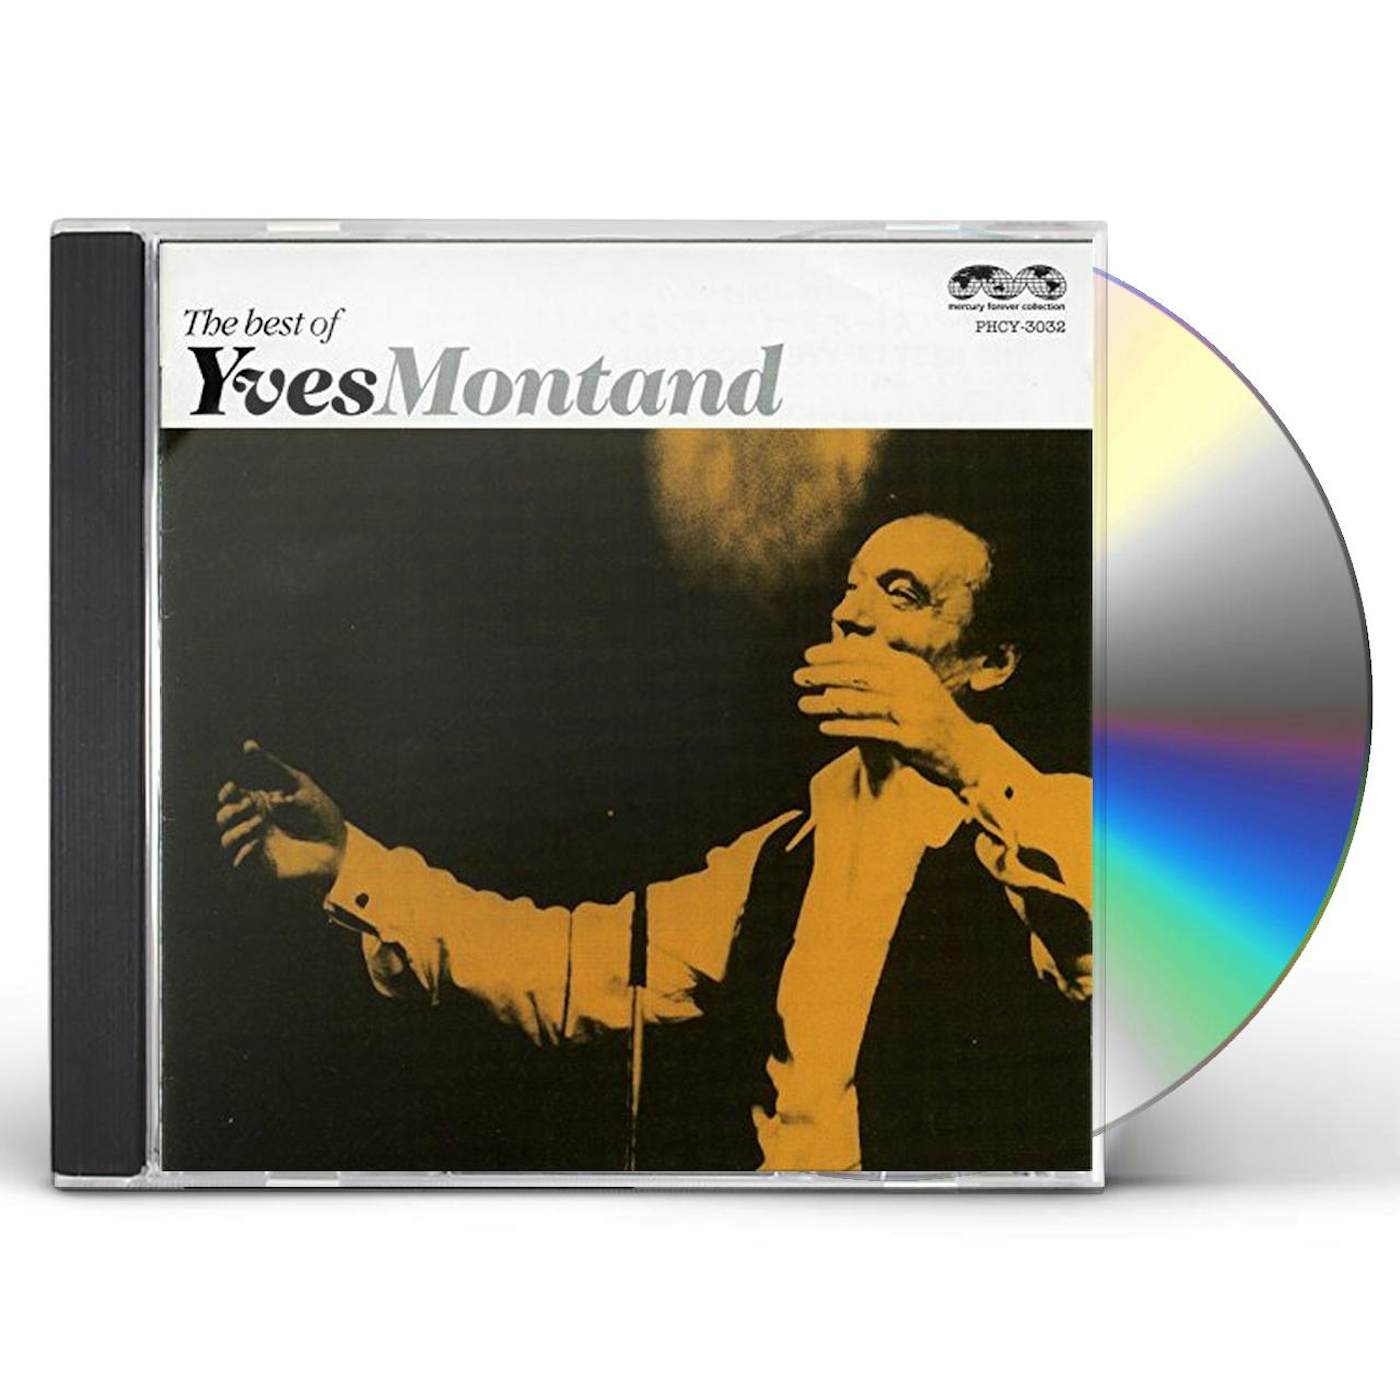 BEST OF YVES MONTAND CD